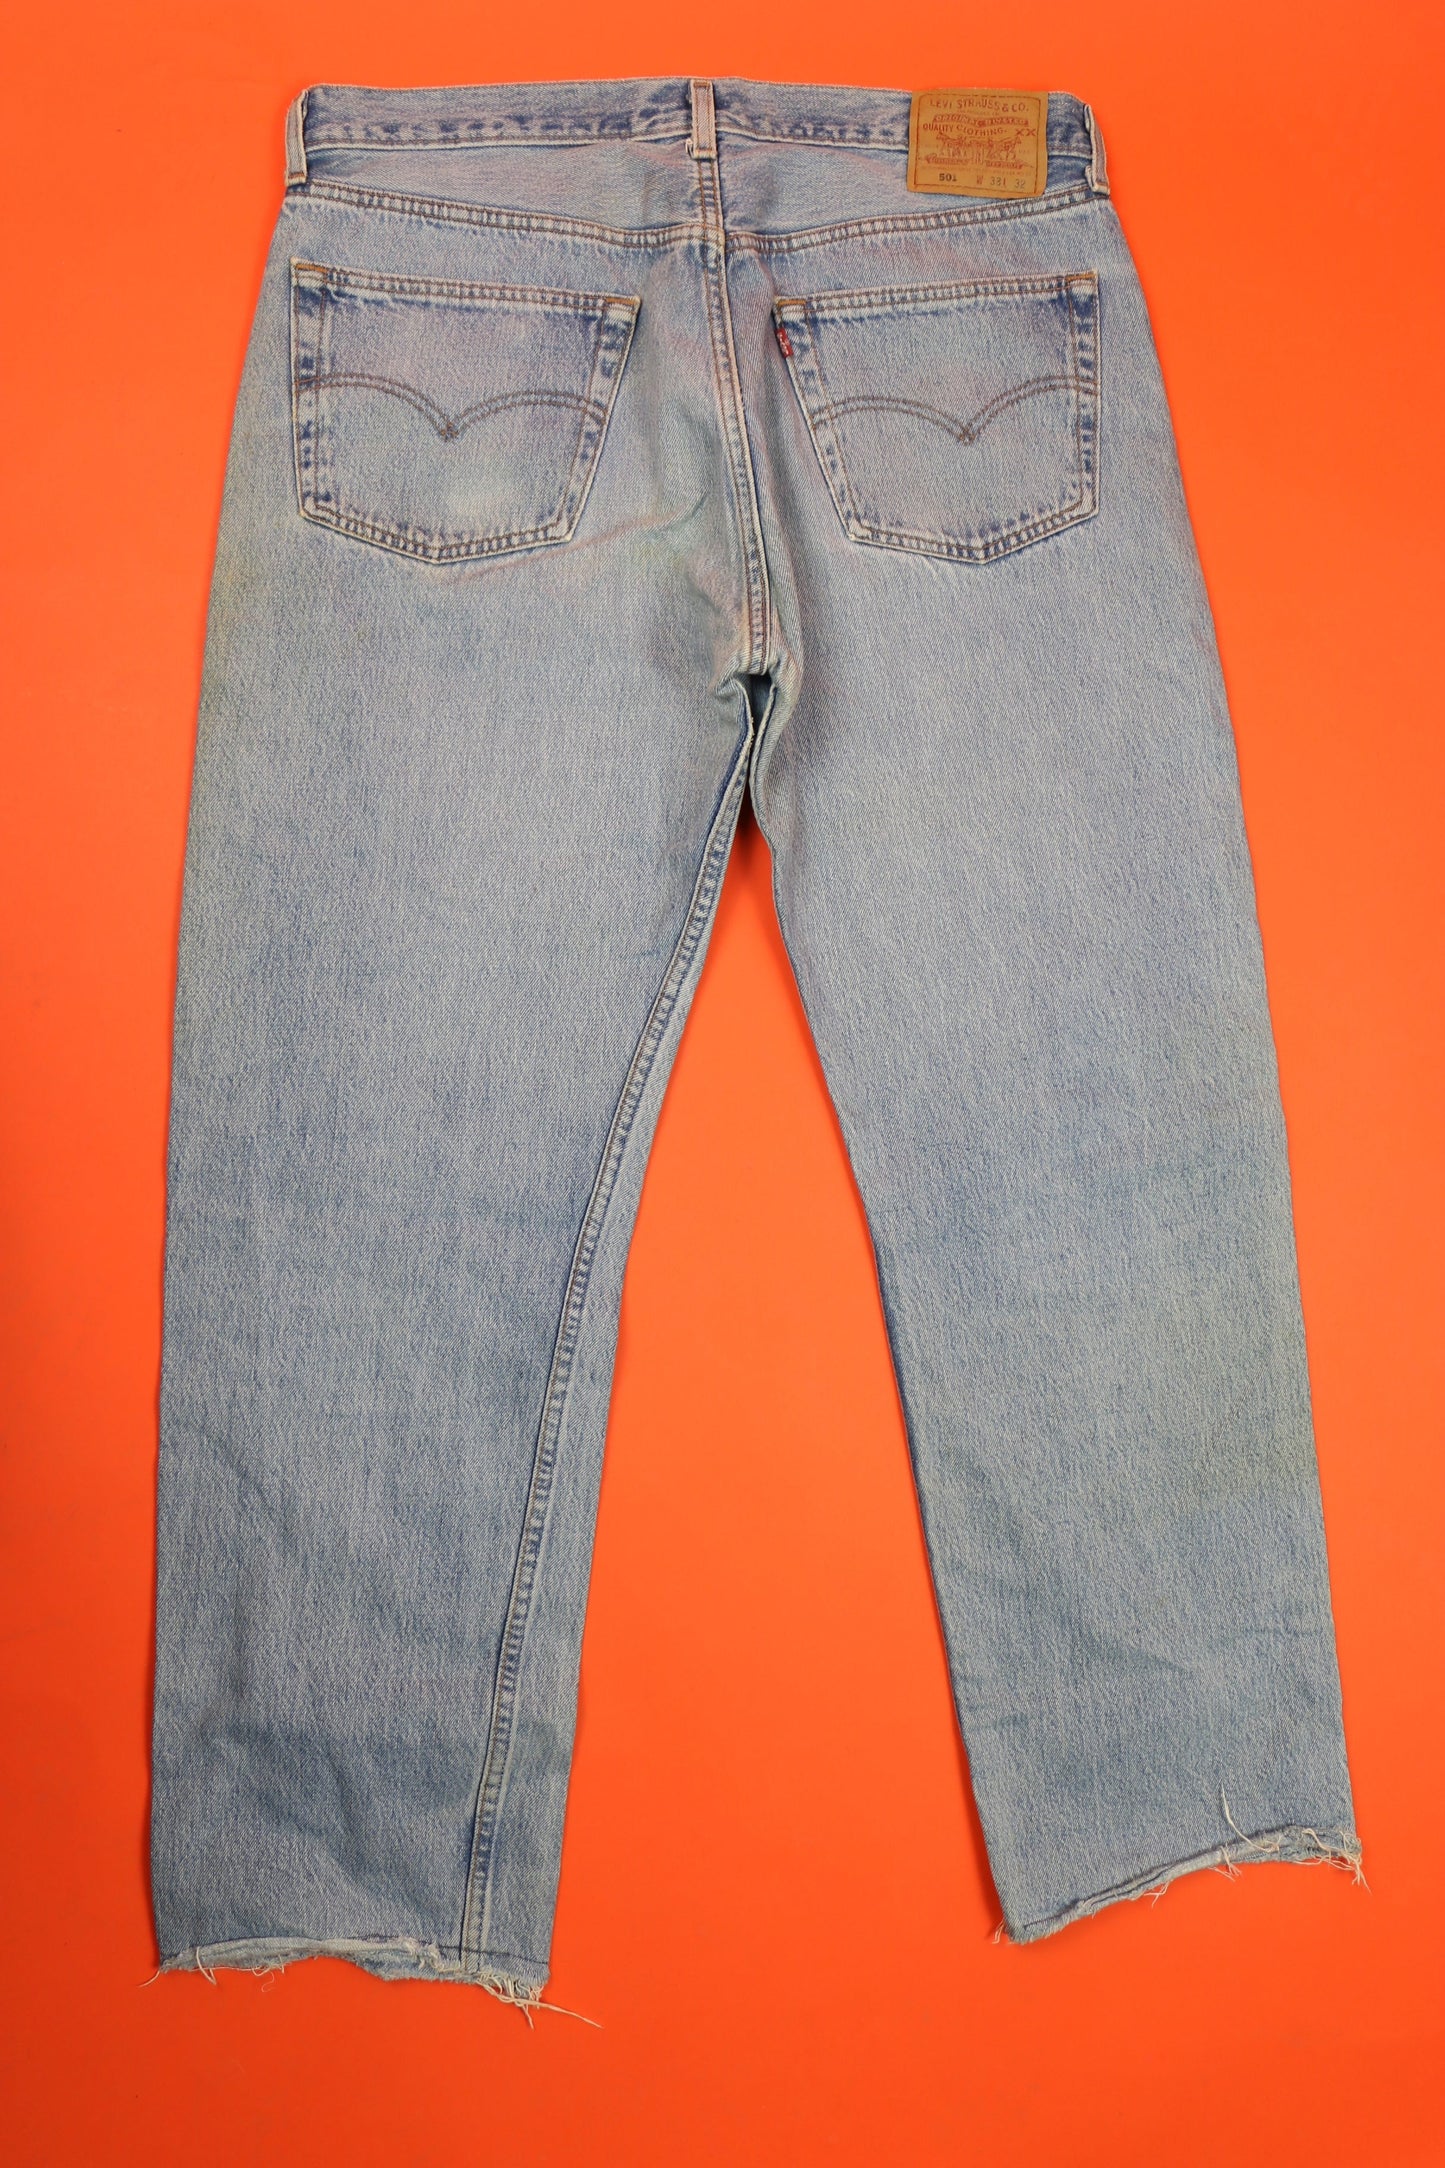 Levi's 501 Jeans Made in U.S.A. 'W38 L32' - vintage clothing clochard92.com